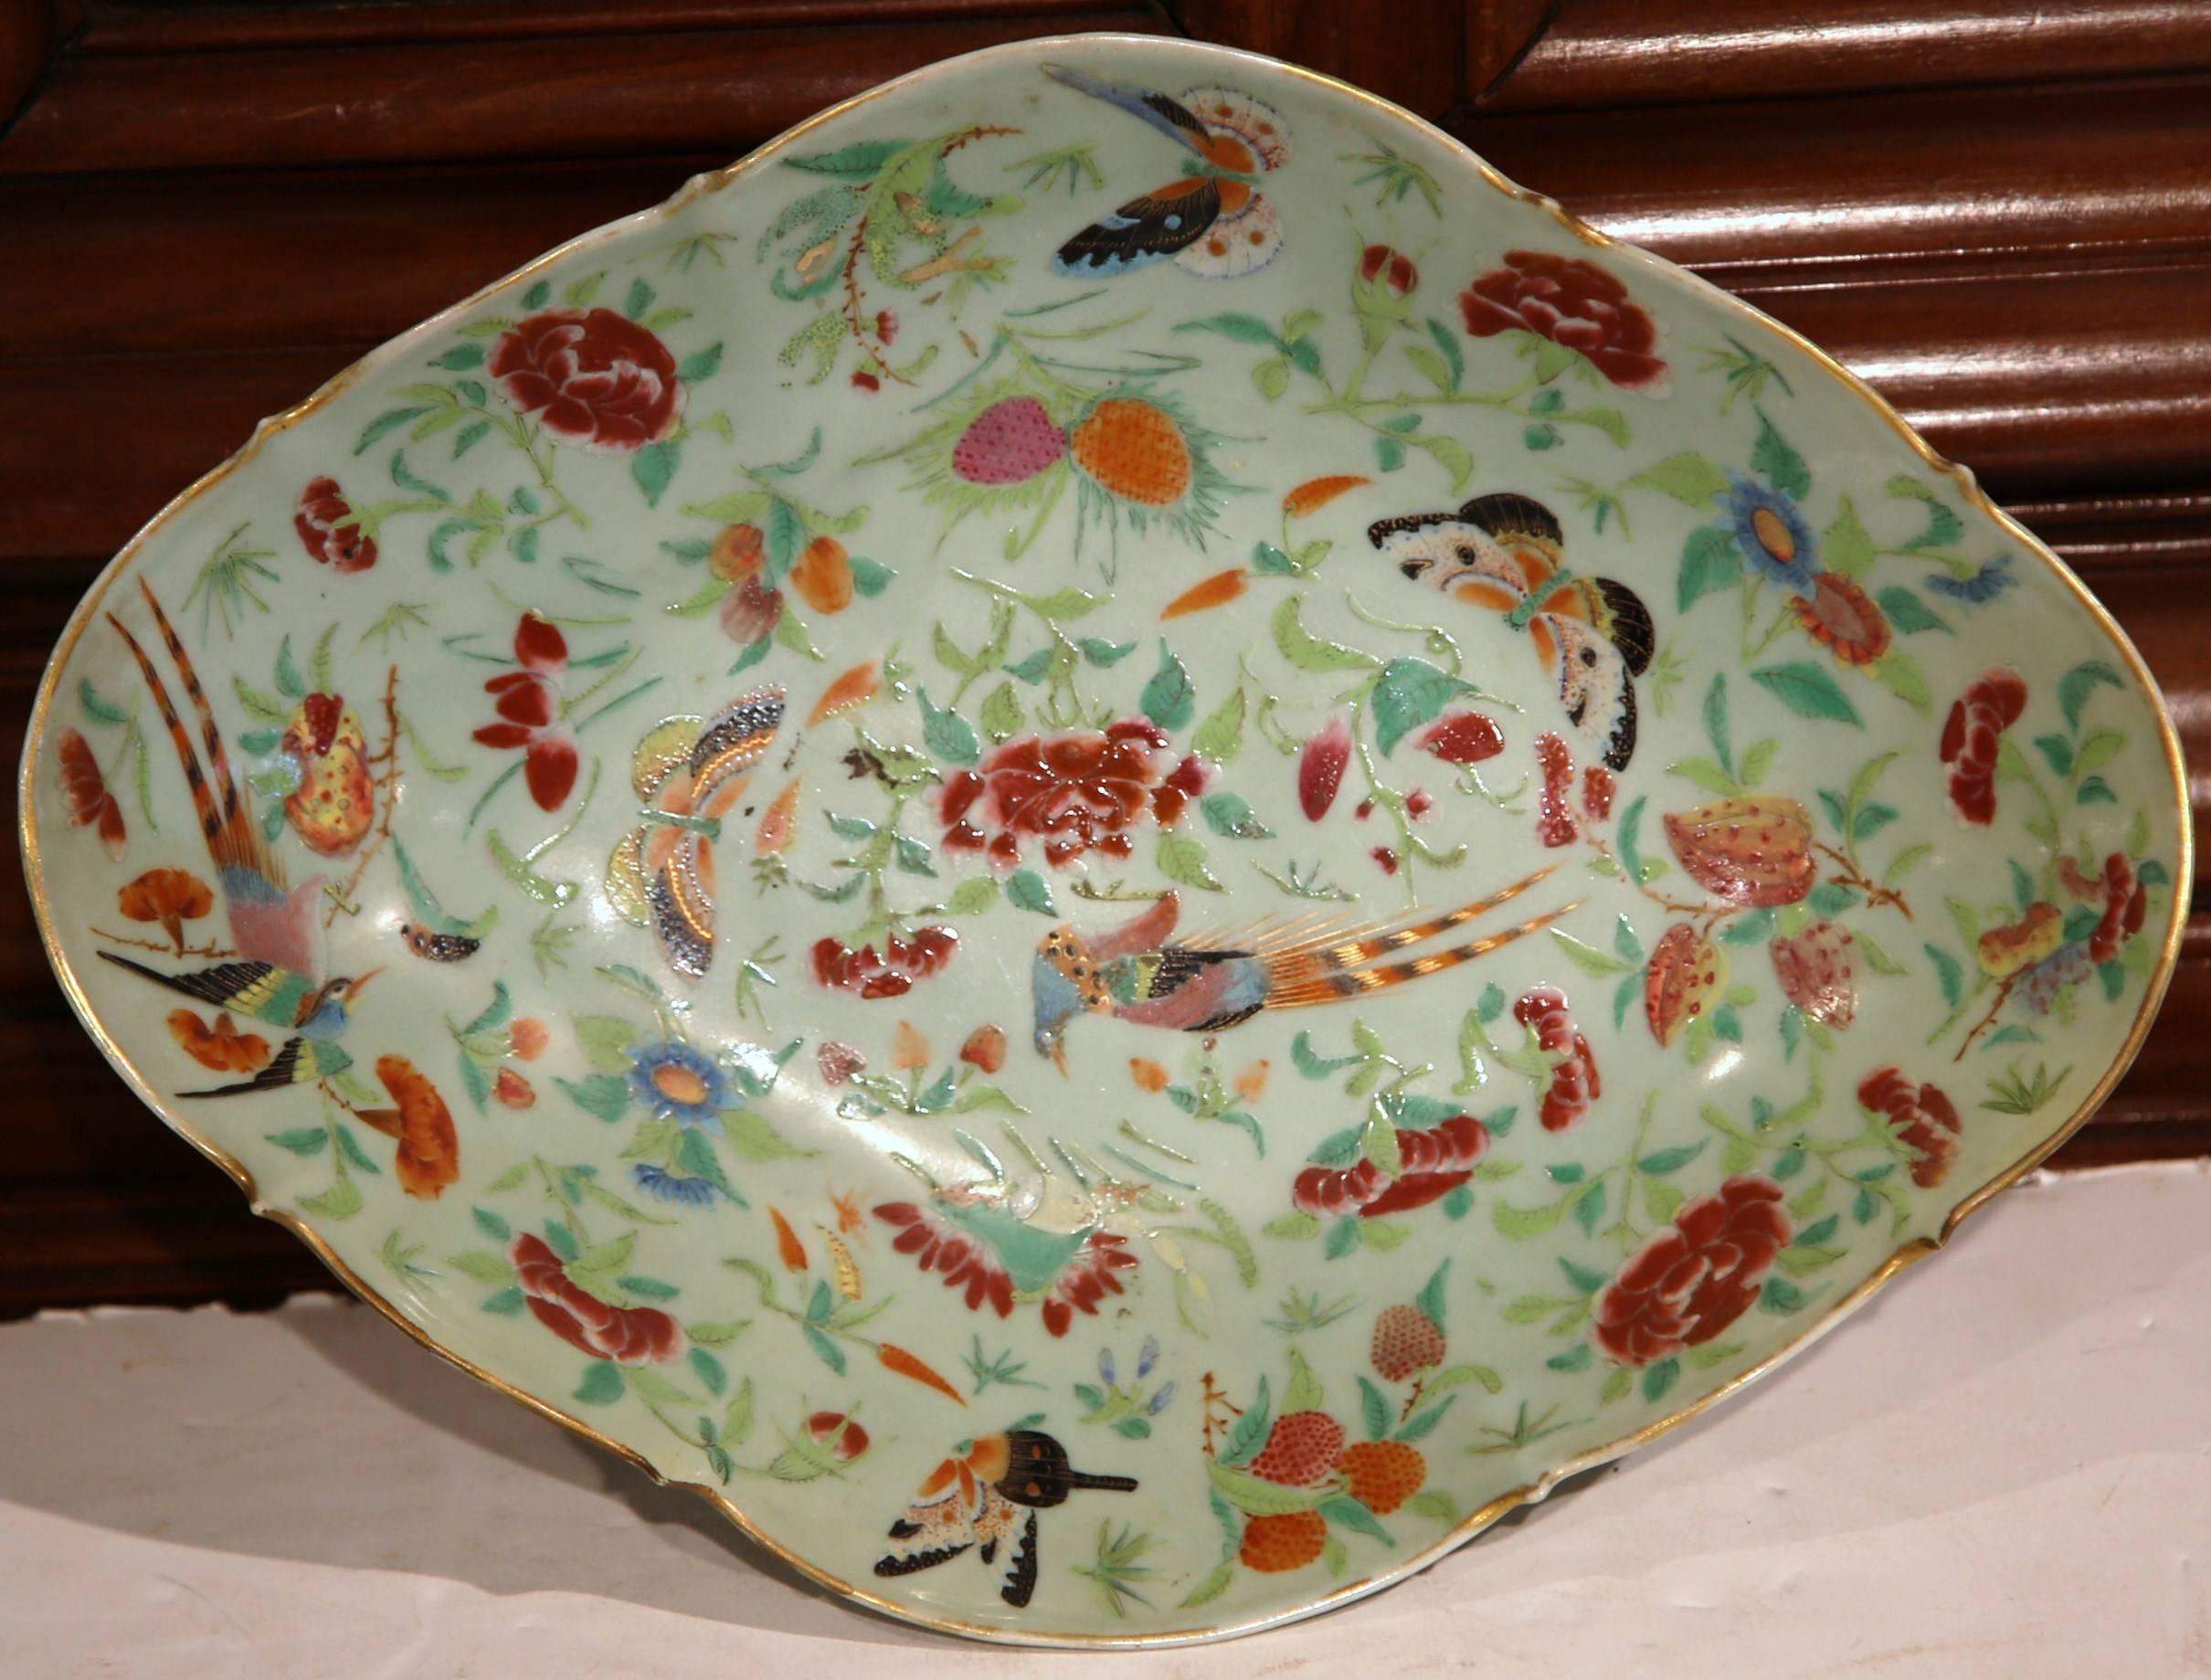 Gilt 19th Century Chinese Hand-Painted Porcelain Dish with Peacocks and Butterflies